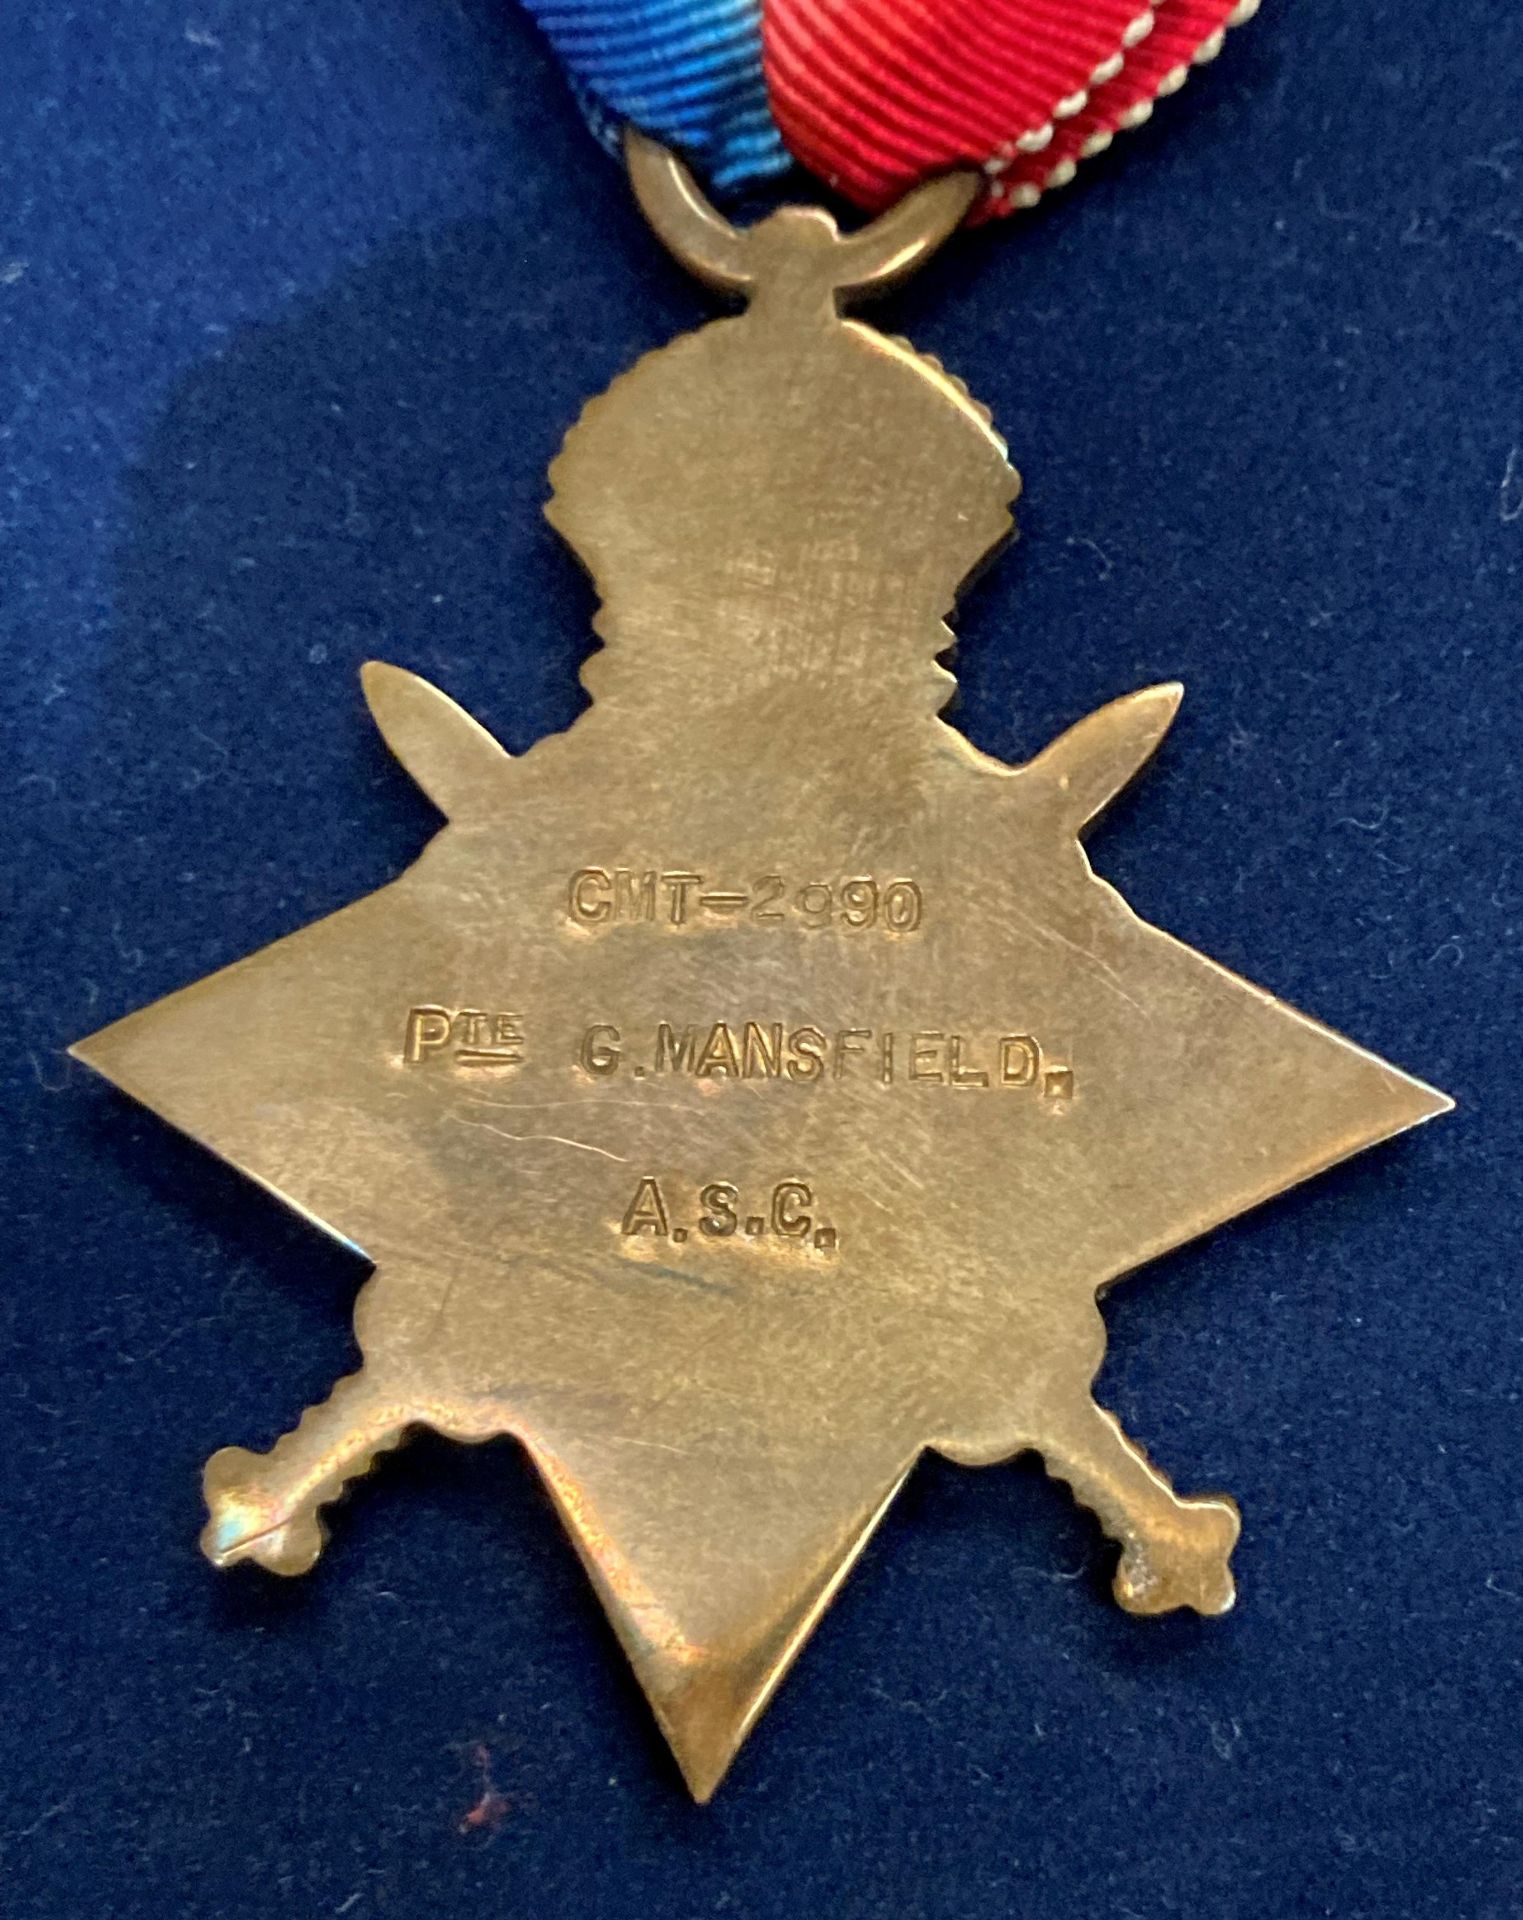 A First World War 1914 Star with ribbon to CMT-2990 Pte. G Mansfield A.S.C. - Image 3 of 5